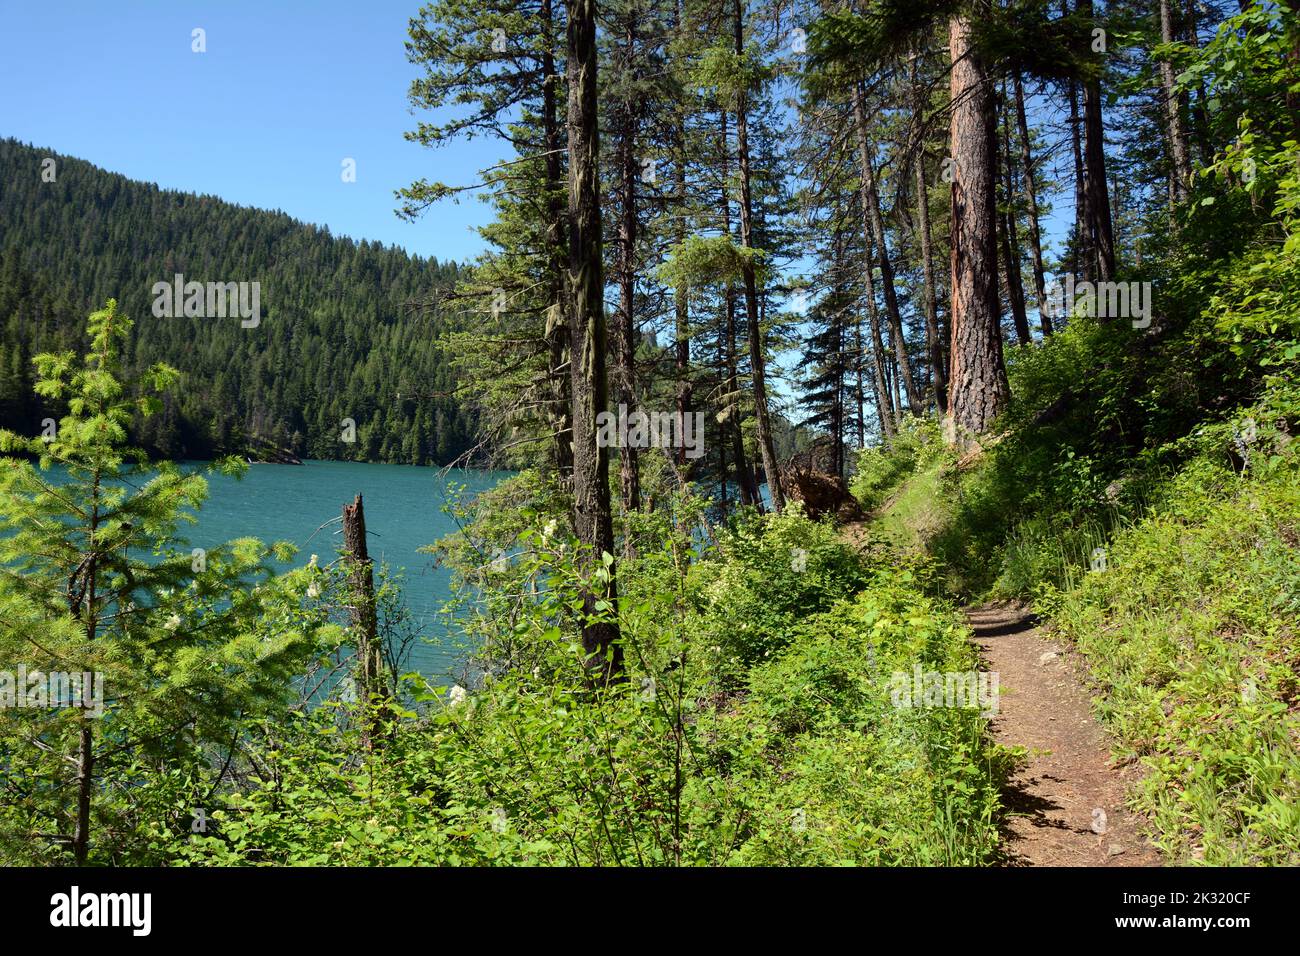 Along a hiking trail on Bead Lake, in the Kaniksu National Forest, in Pend-Oreille County, northeastern Washington State, United States. Stock Photo